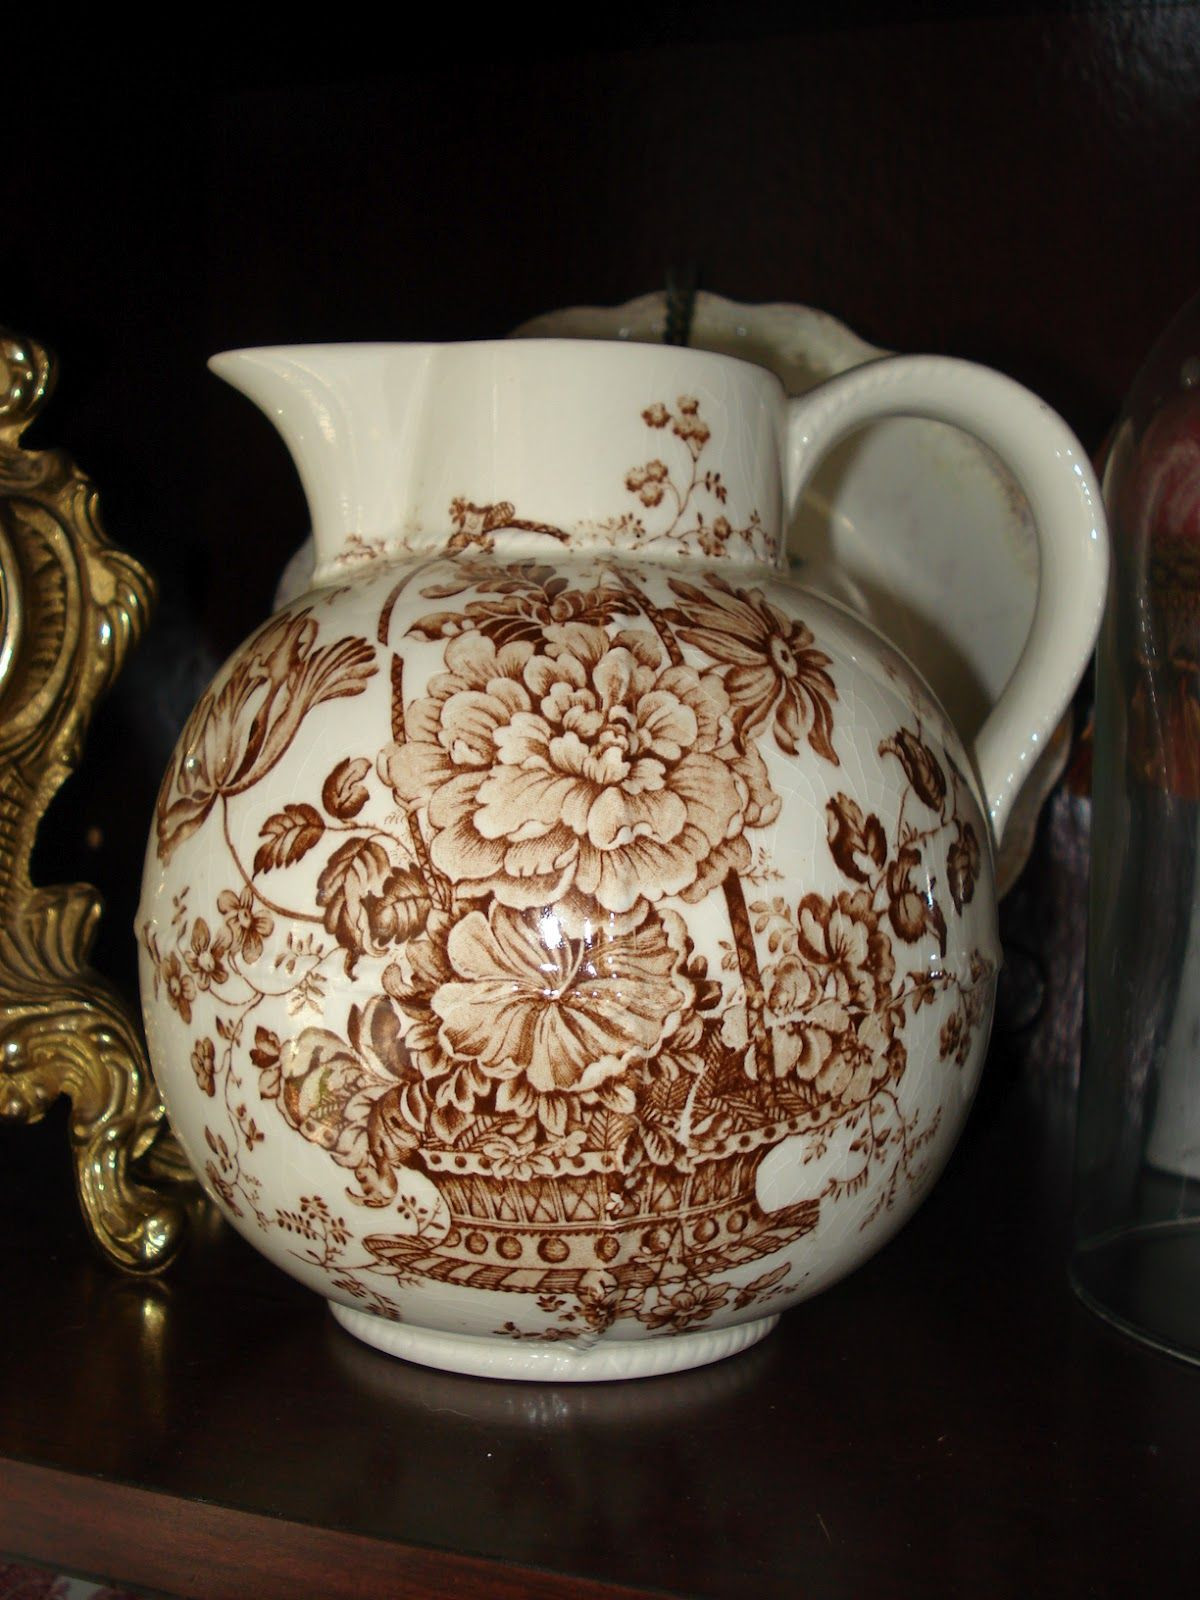 20 Trendy Rustic Pitcher Vase 2024 free download rustic pitcher vase of brown transferware pitcher just gorgeous i have treasure intended for brown transferware pitcher just gorgeous i have treasure several pieces in this pattern love love